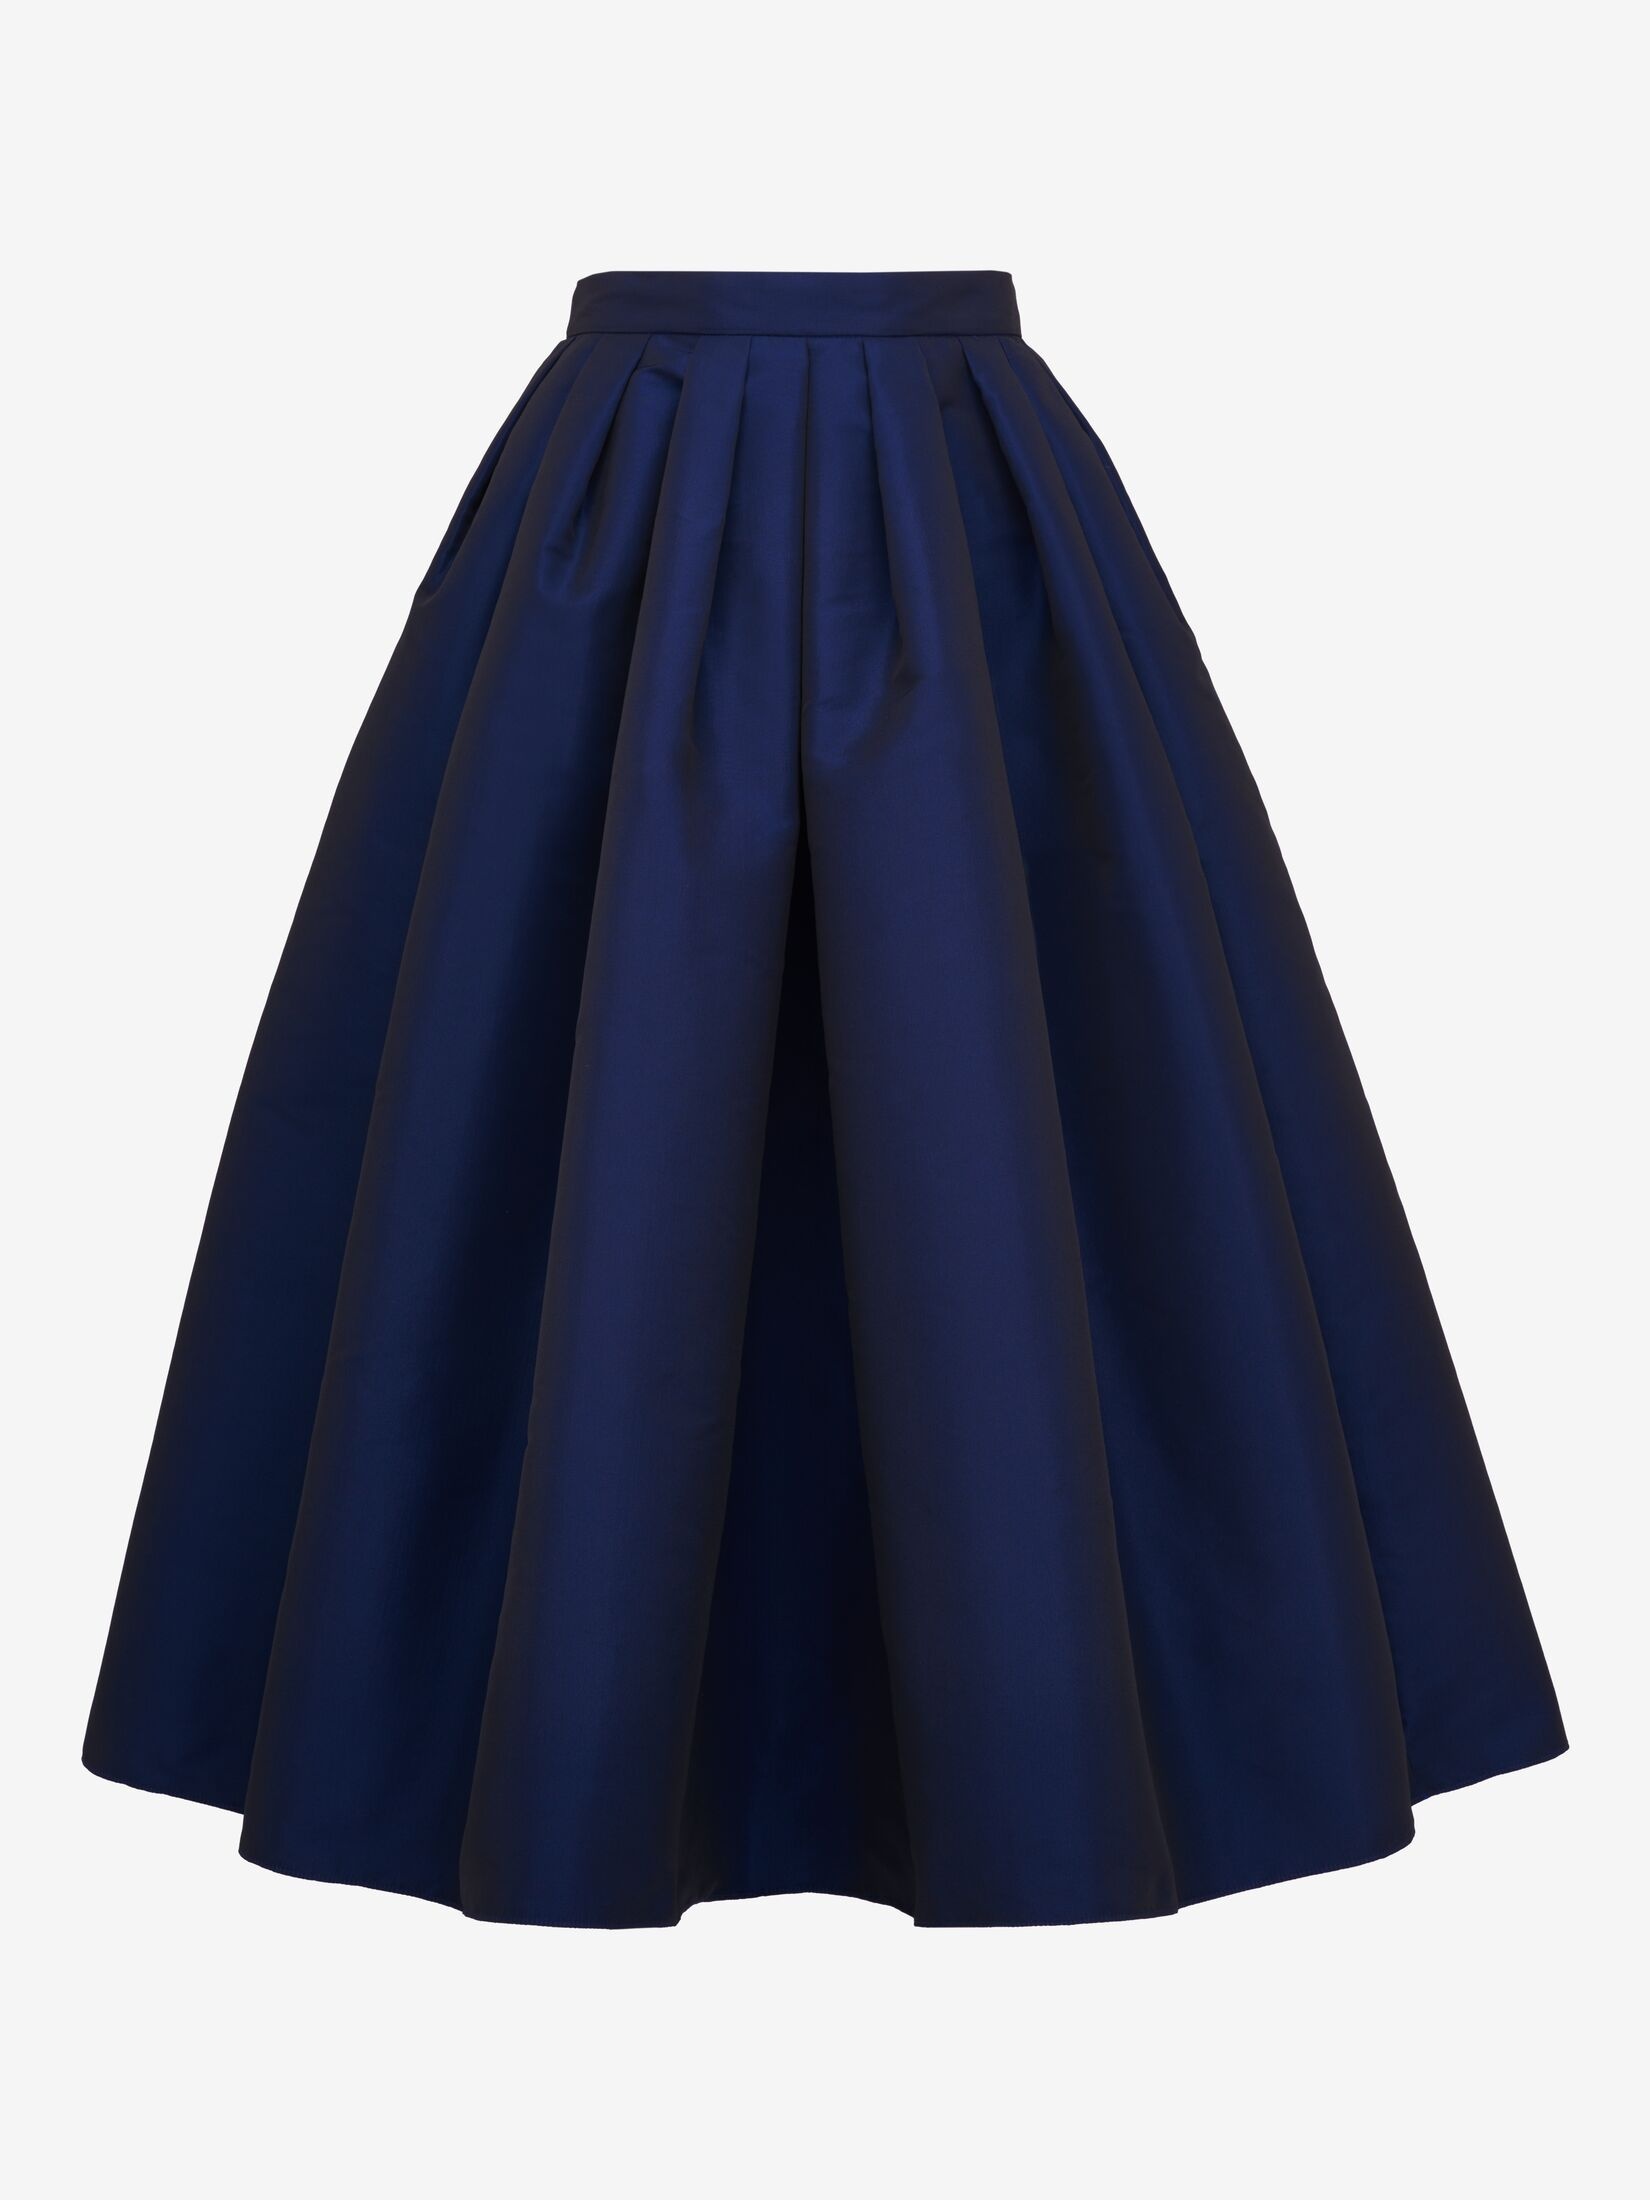 Women's Pleated Midi Skirt in Electric Navy - 1